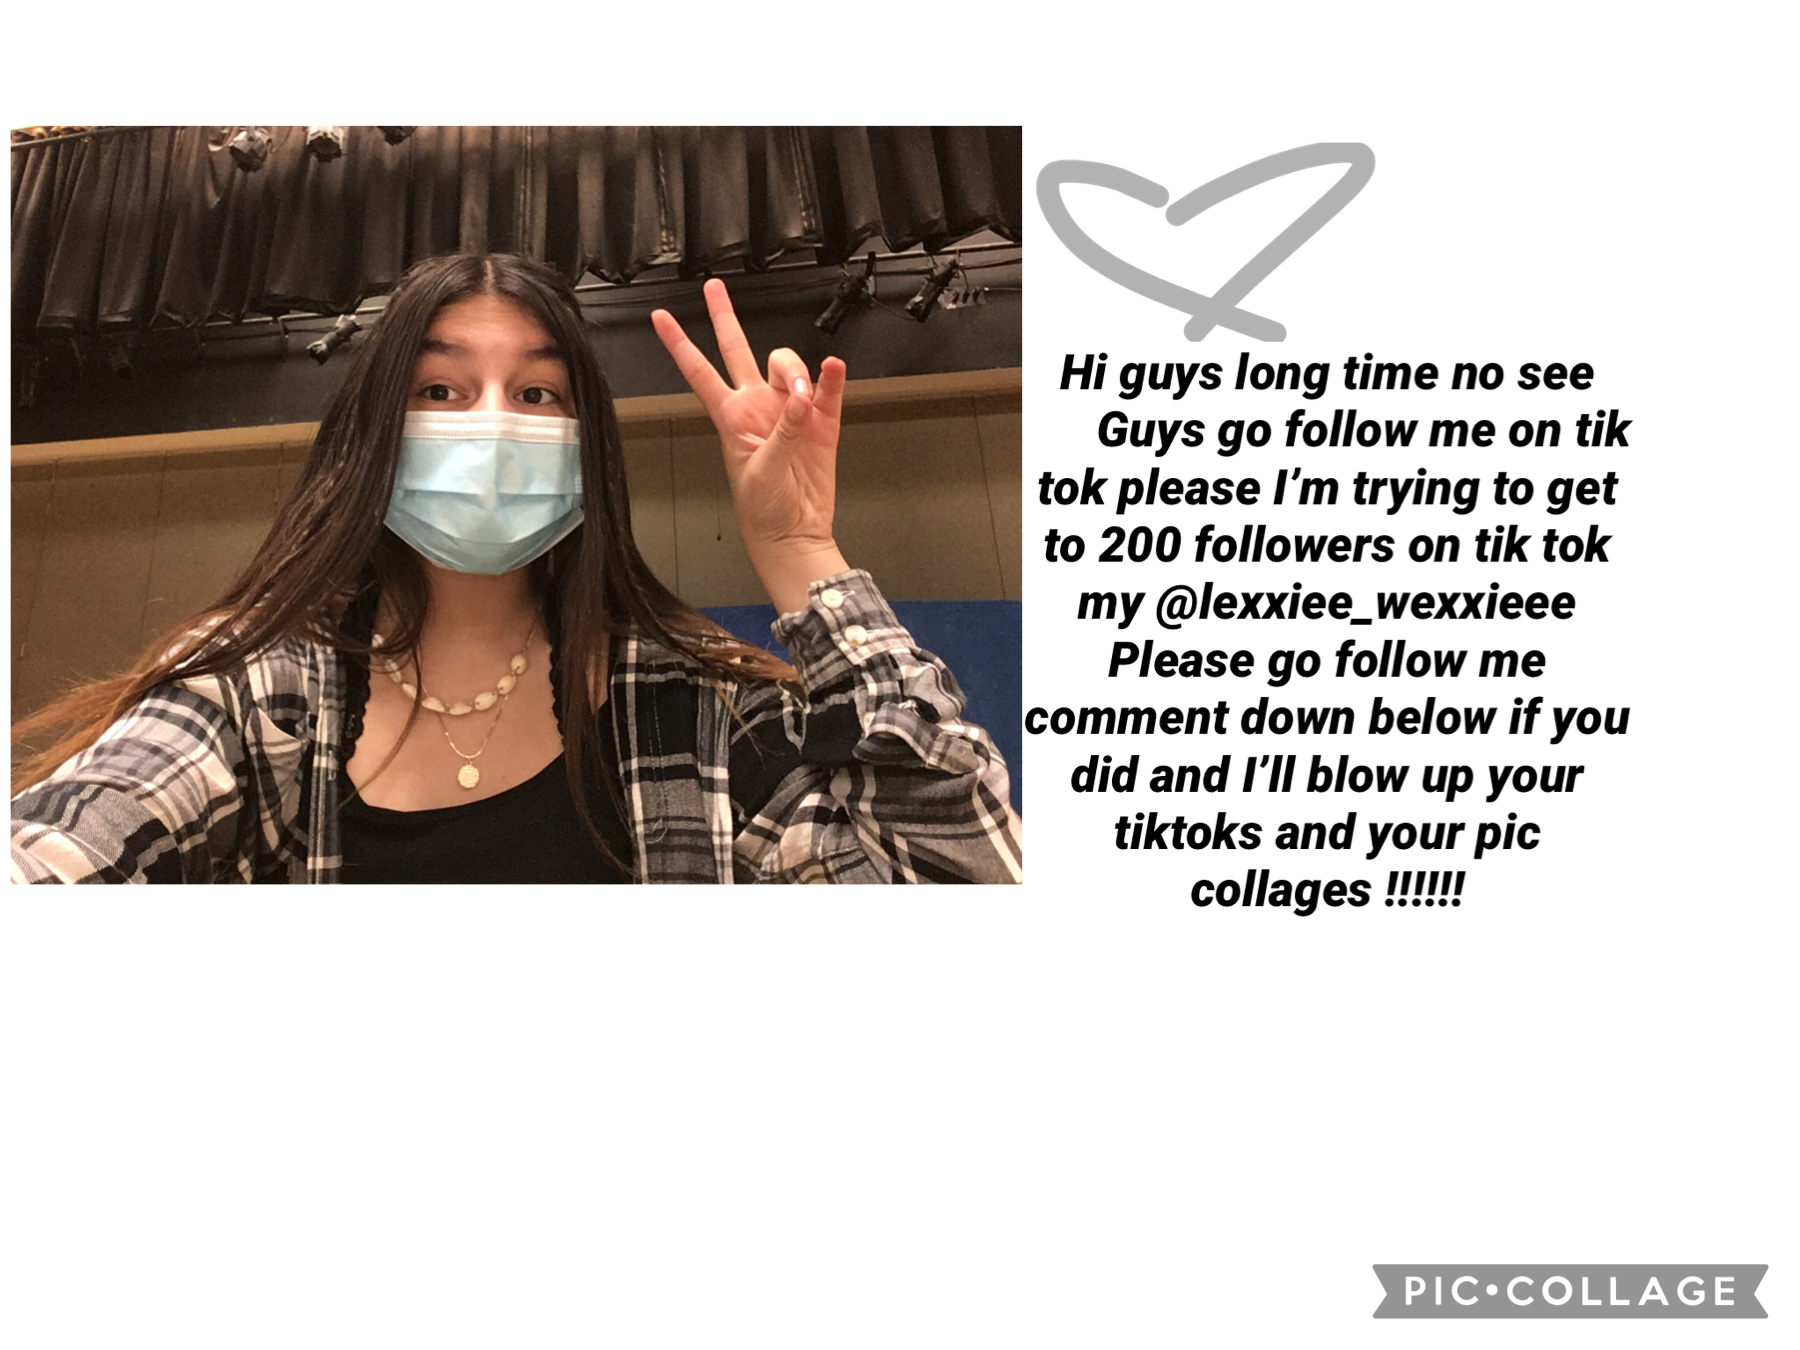 @lexxiee_wexxieee go follow me comment down below if you did it 🥺🥺🥺🥺🥺pleaseee i love you guys !